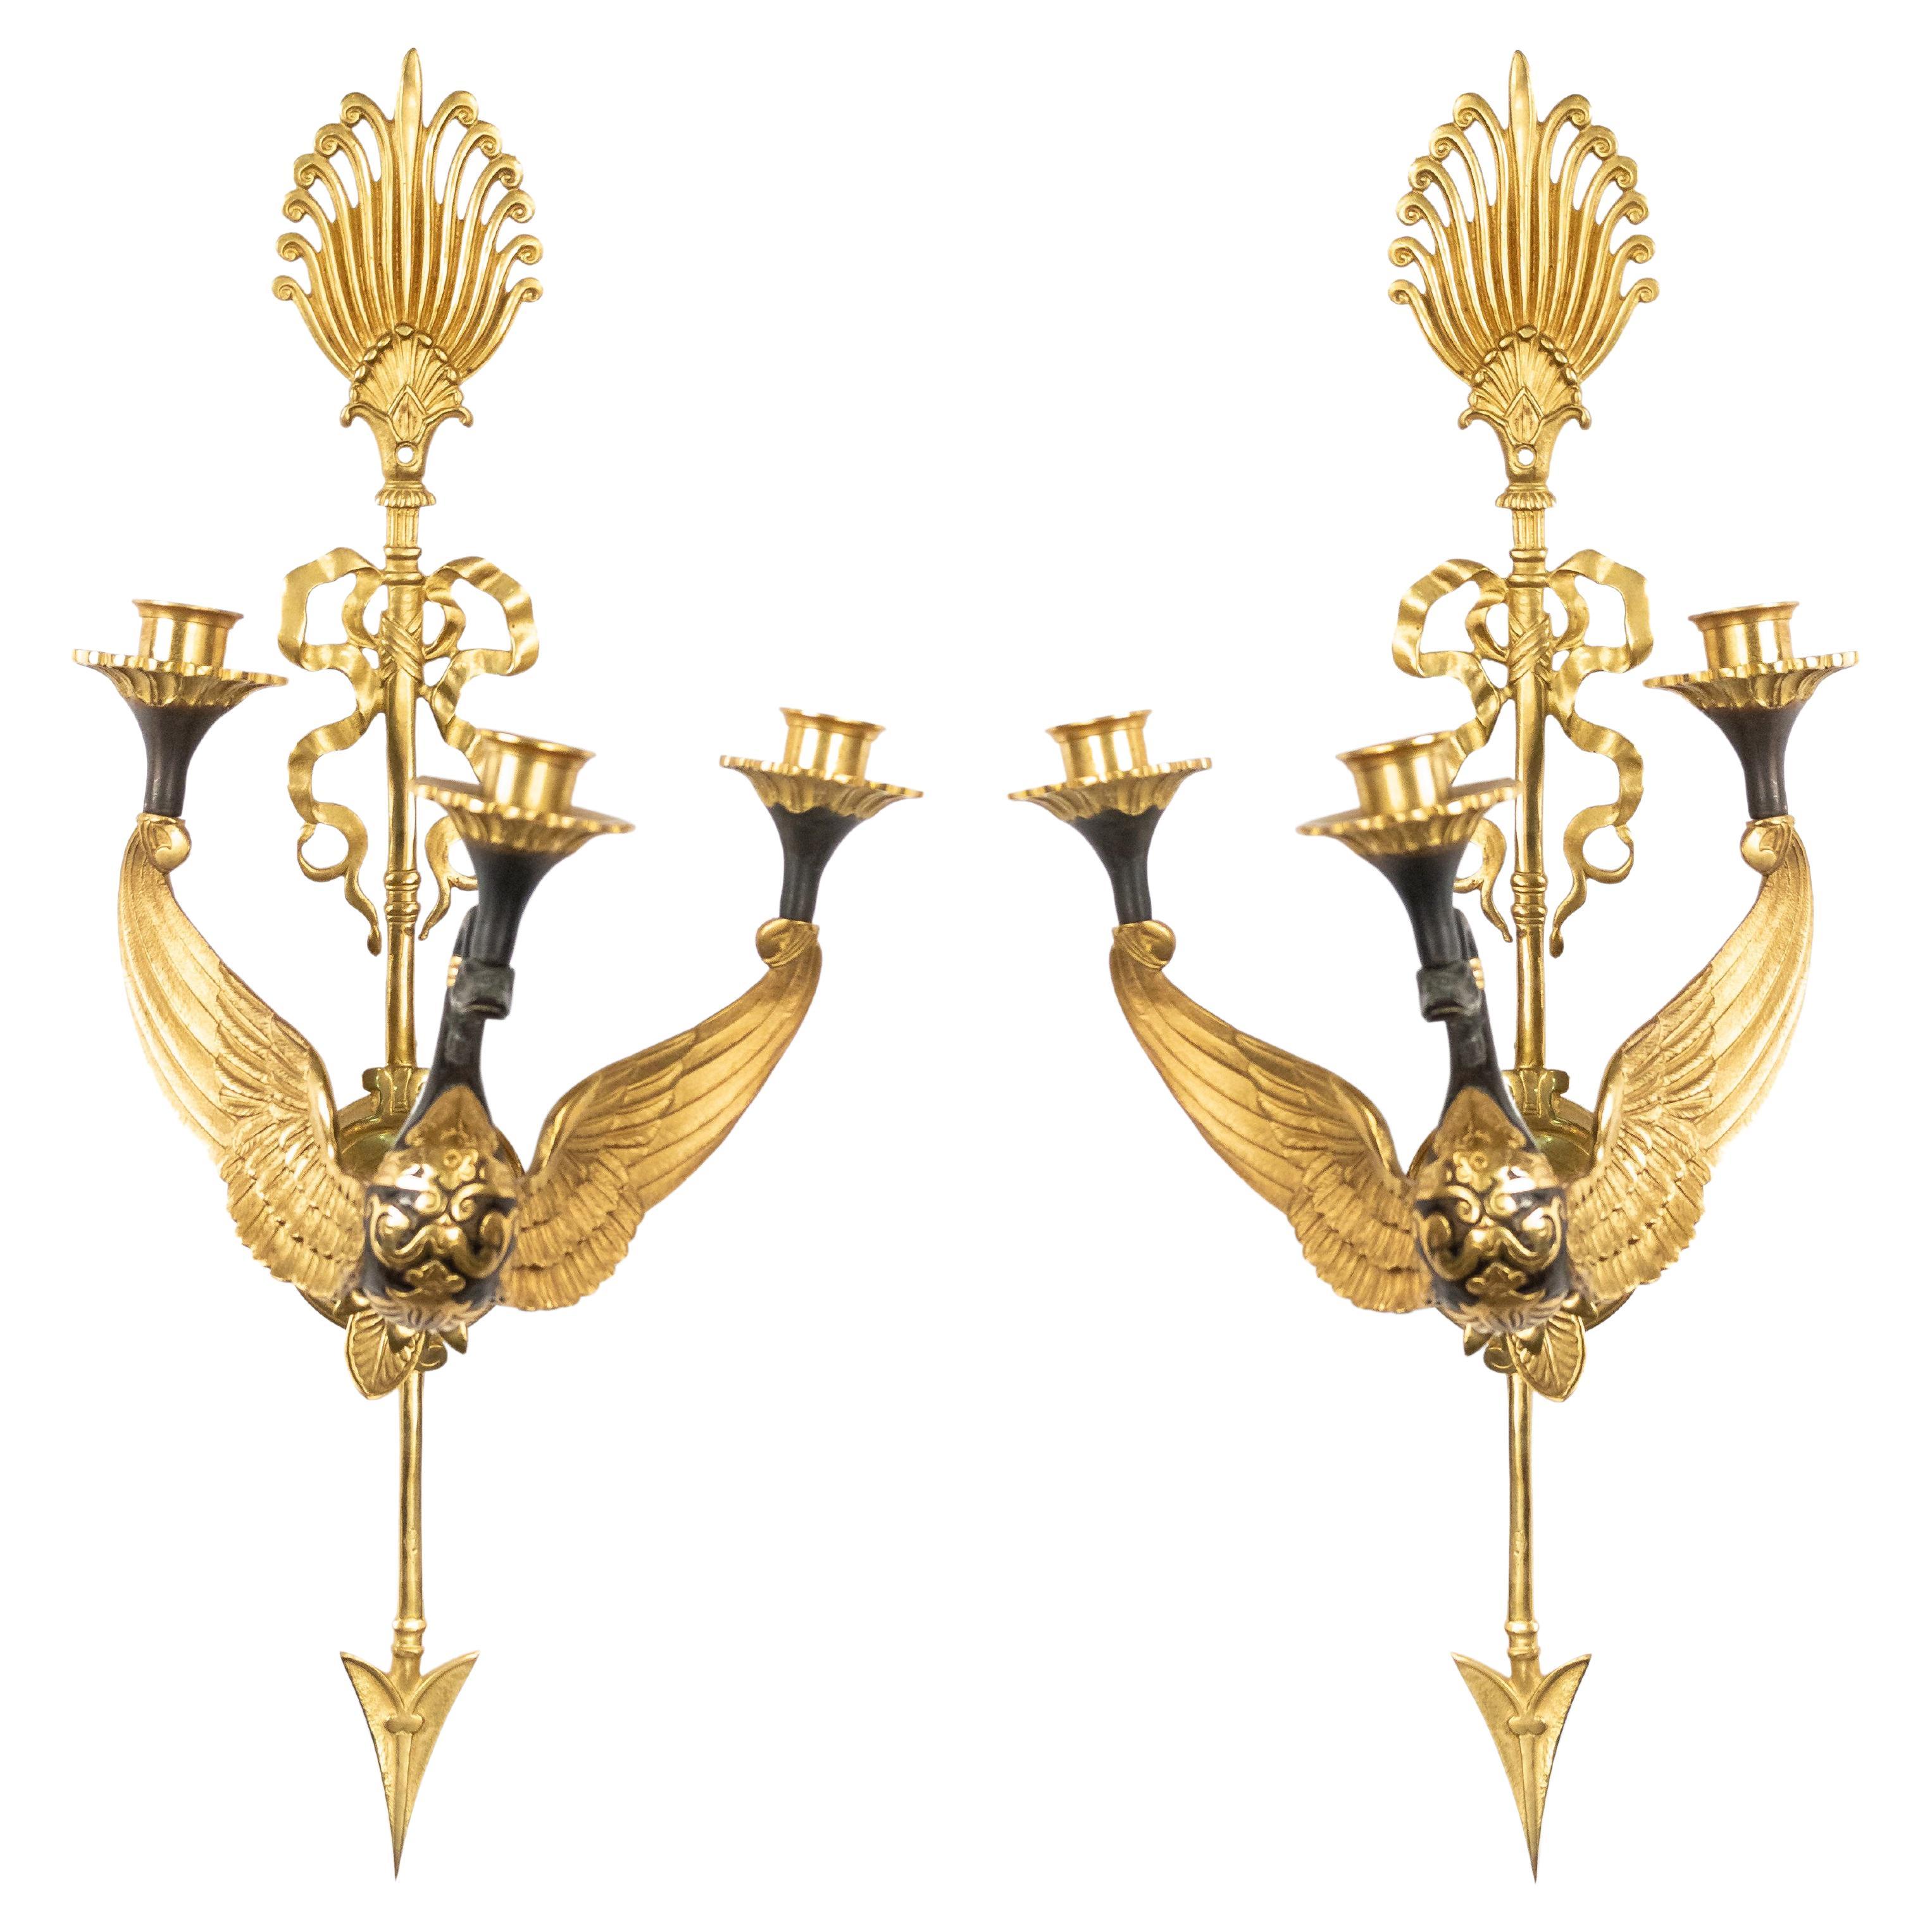 Pair of Russian Neoclassic Style Two-Arm Sconces